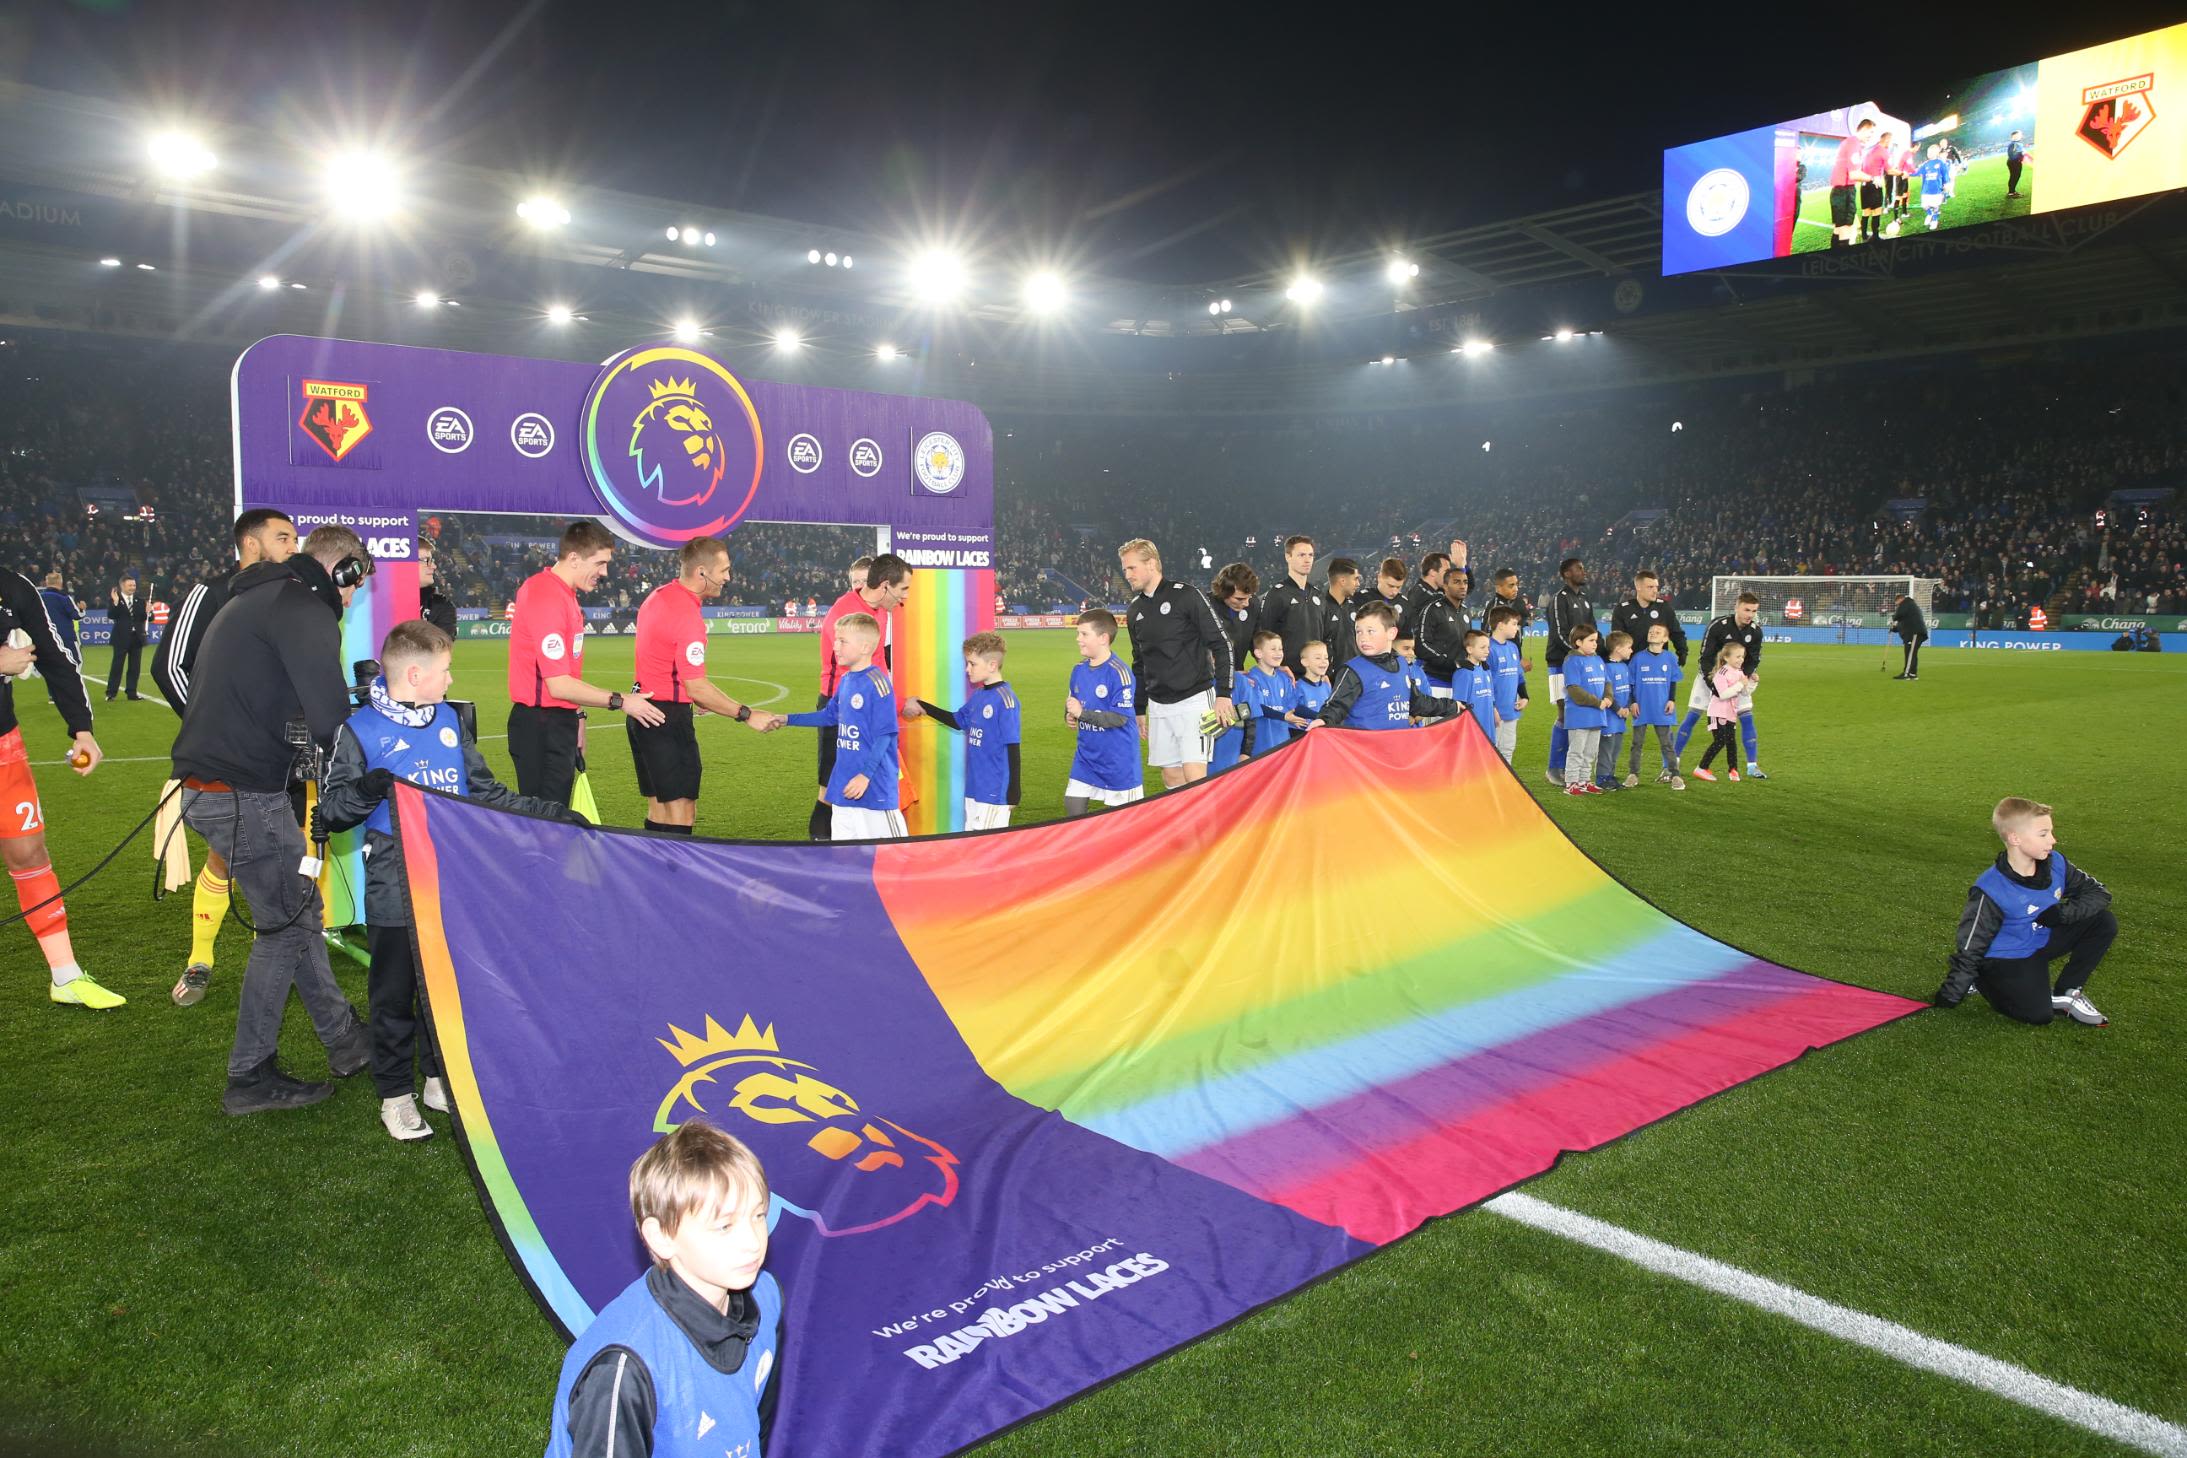 Man City, Chelsea and more Premier League clubs trolled for LGBT support